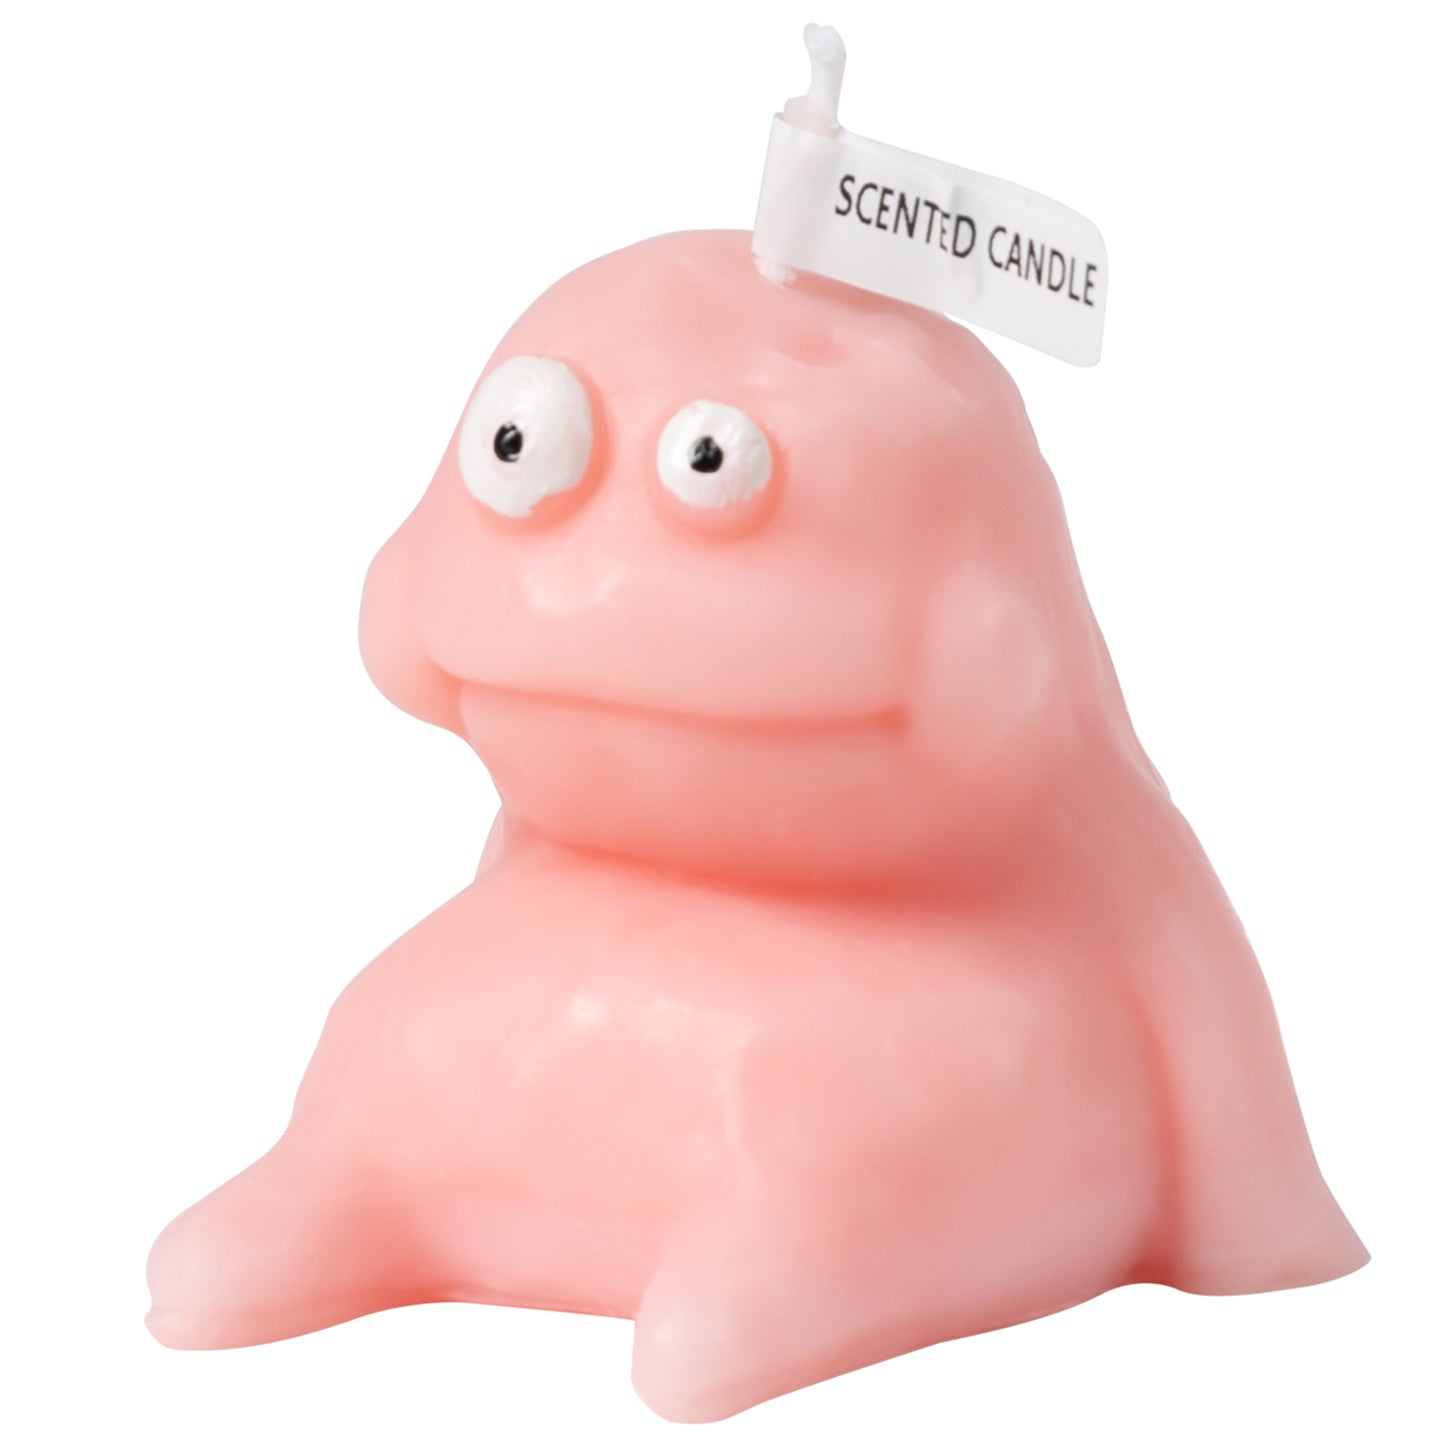 Rejuuv: Sitting Mudman Shaped Scented Candle